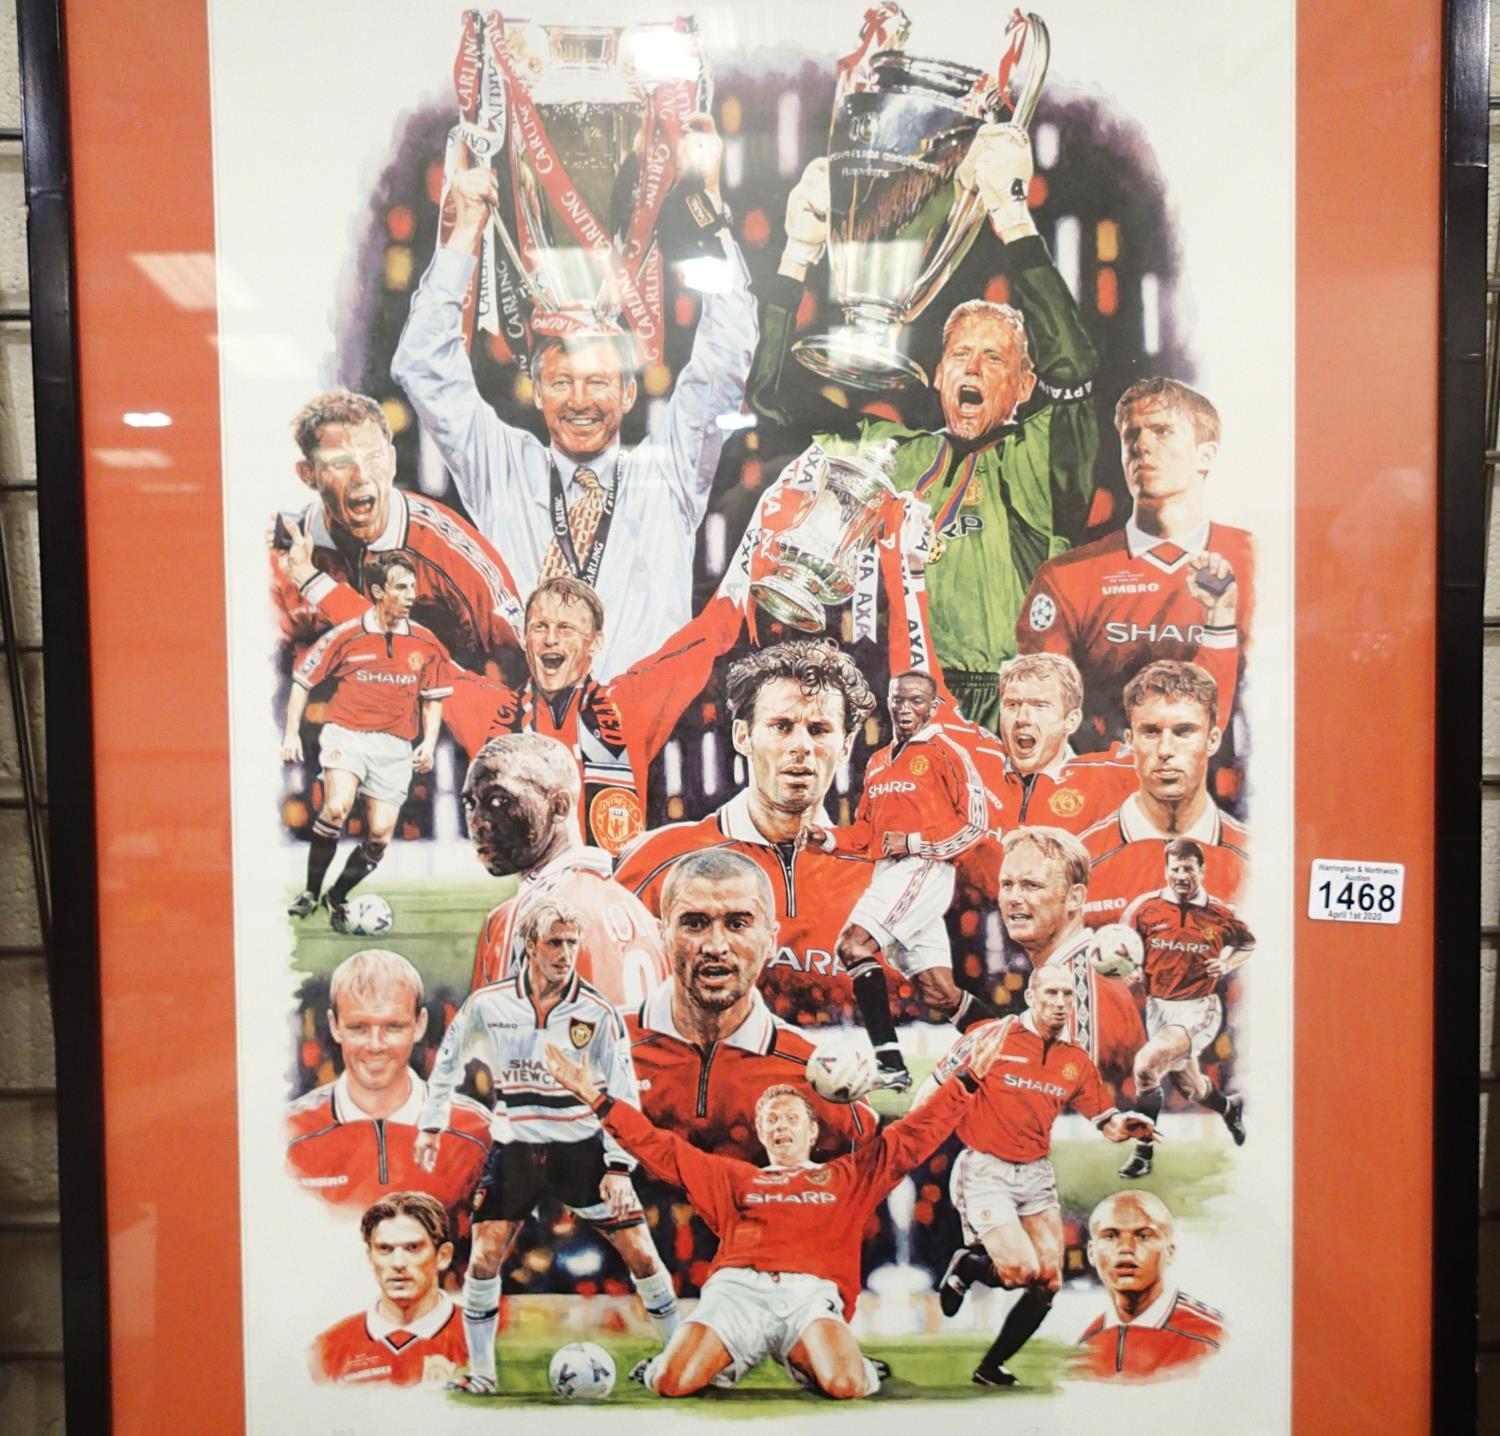 Signed framed limited edition print, Mission Impossible Manchester United 392/1000. Frame size